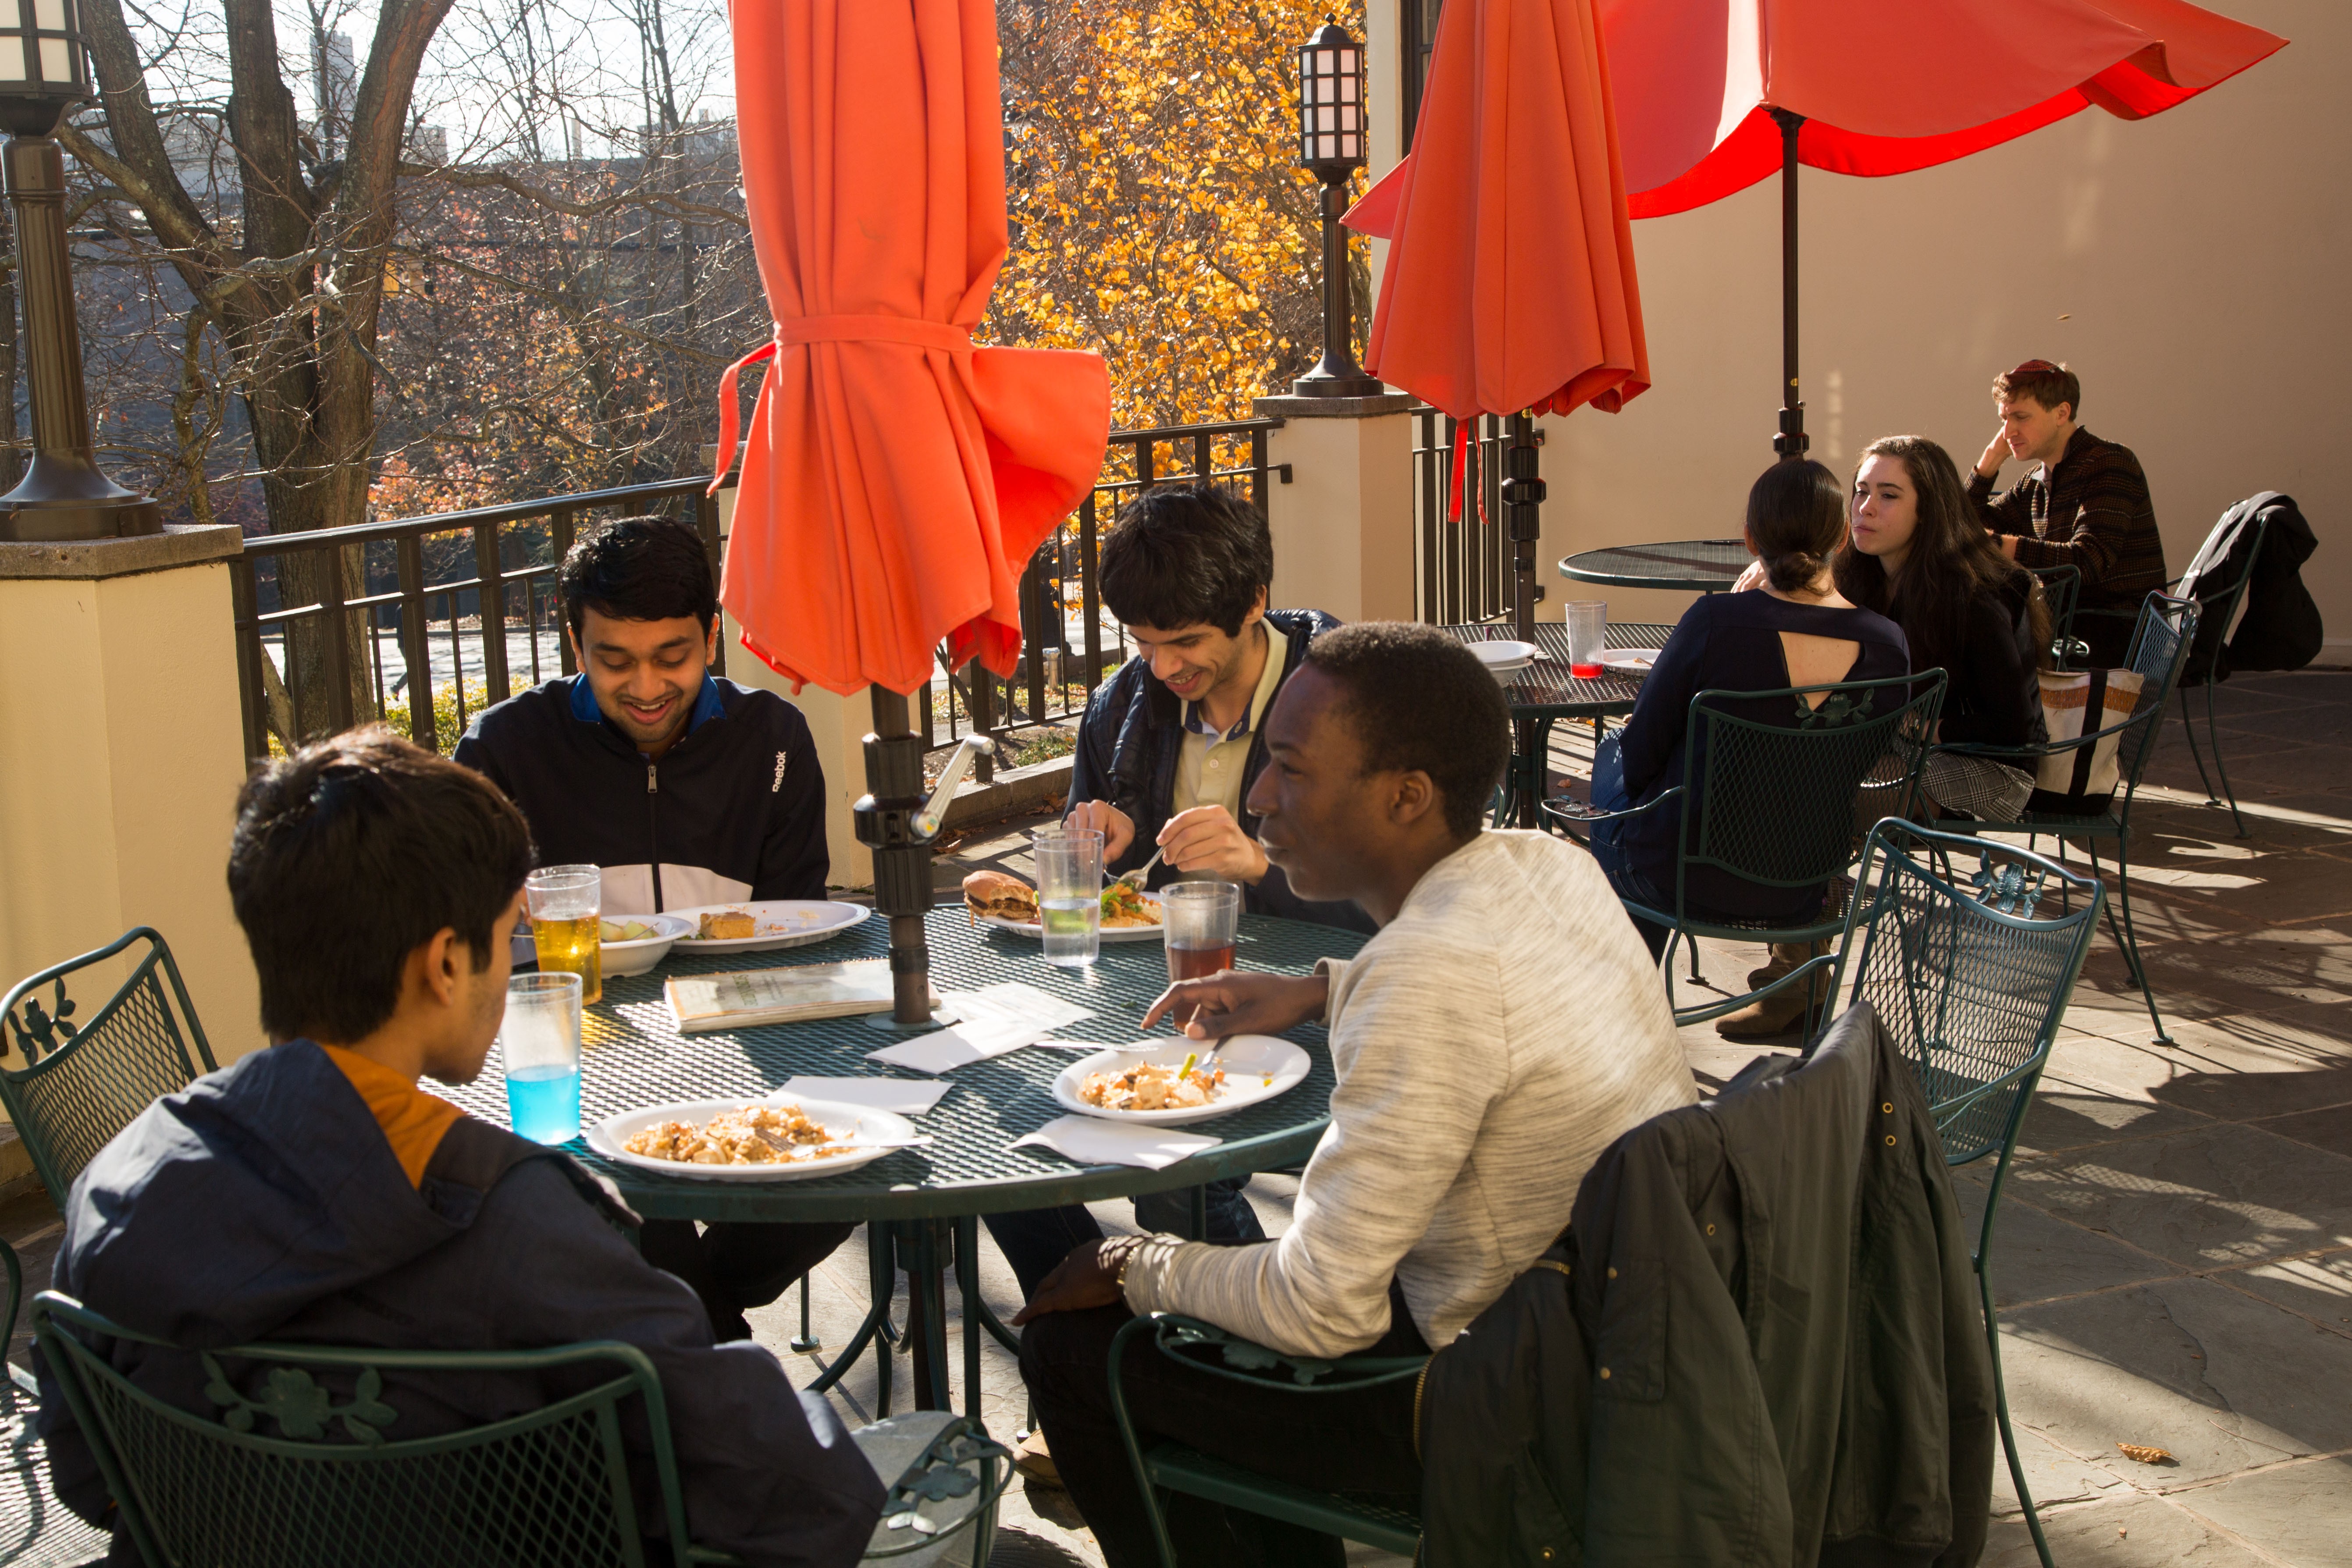 Students eating outside on a terrace.